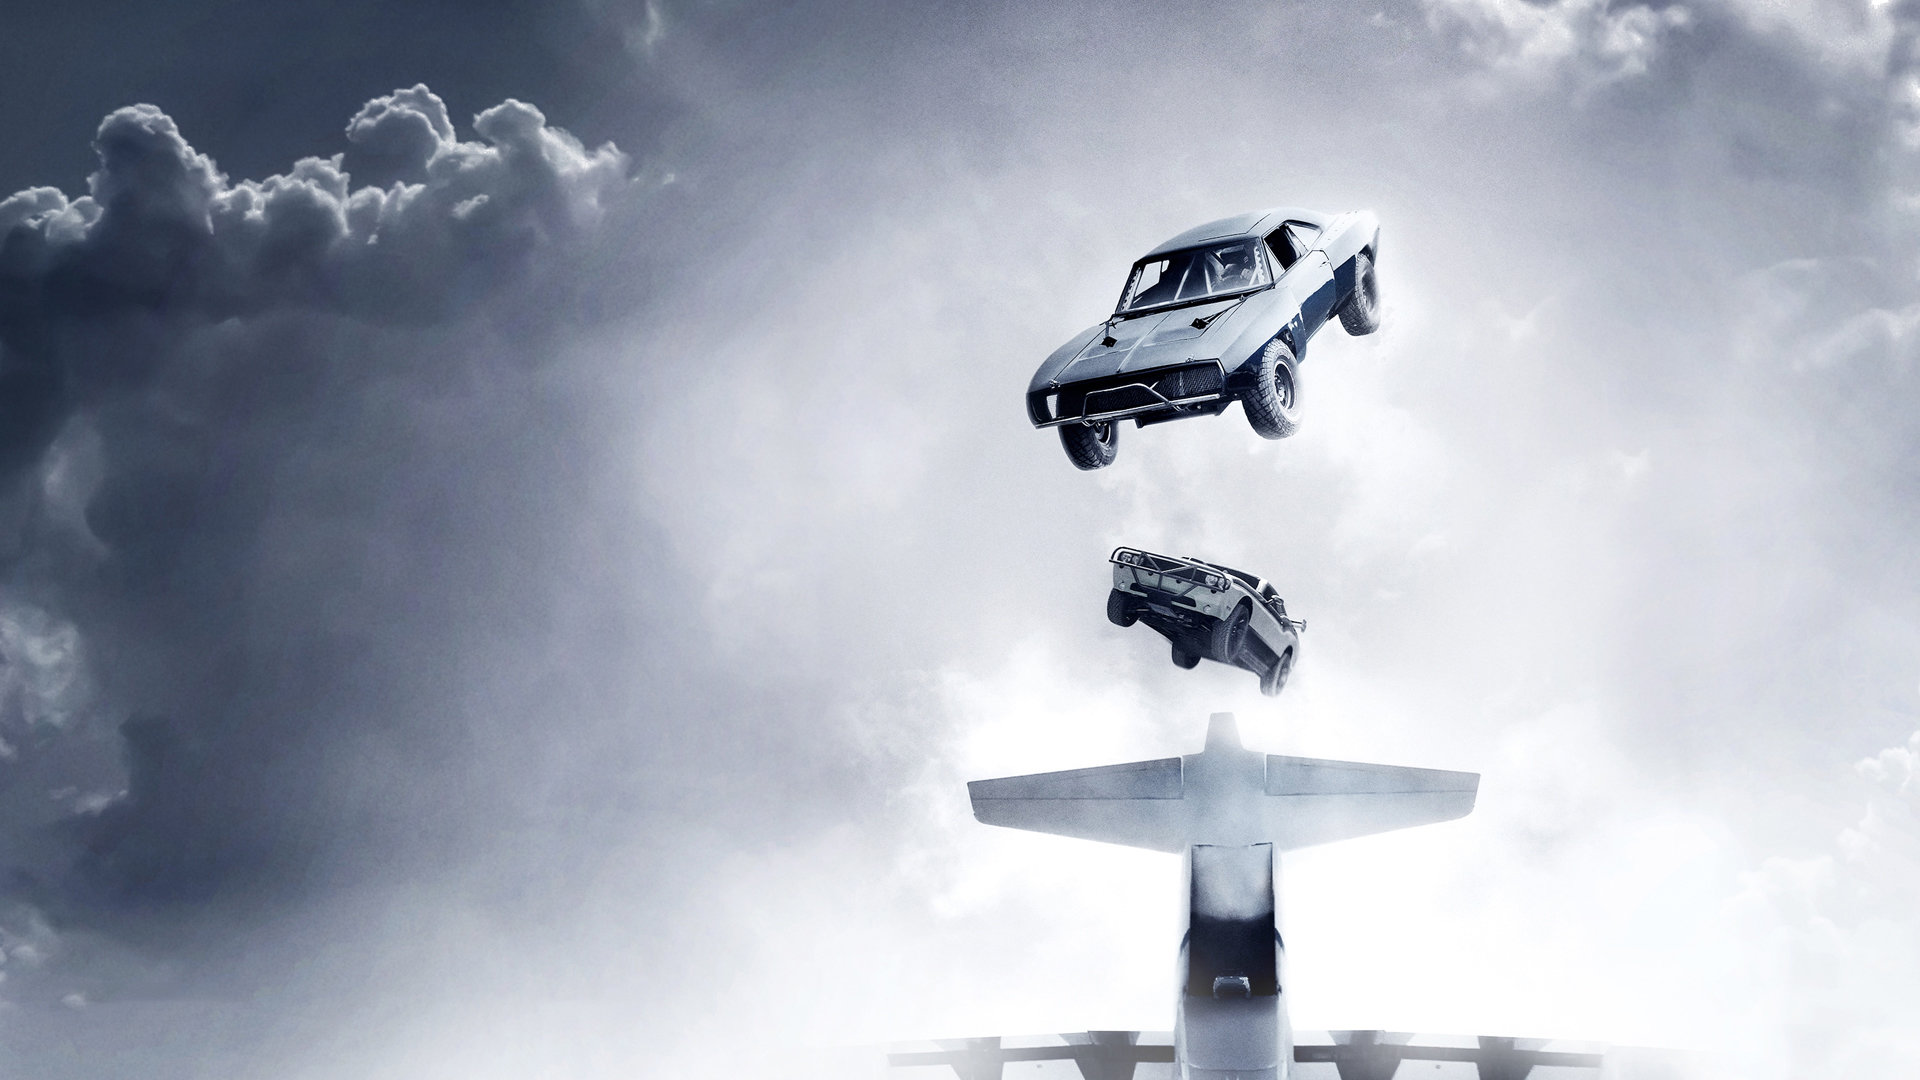 Fast And Furious 7 Wallpapers 1920x1080 Full Hd 1080p Desktop